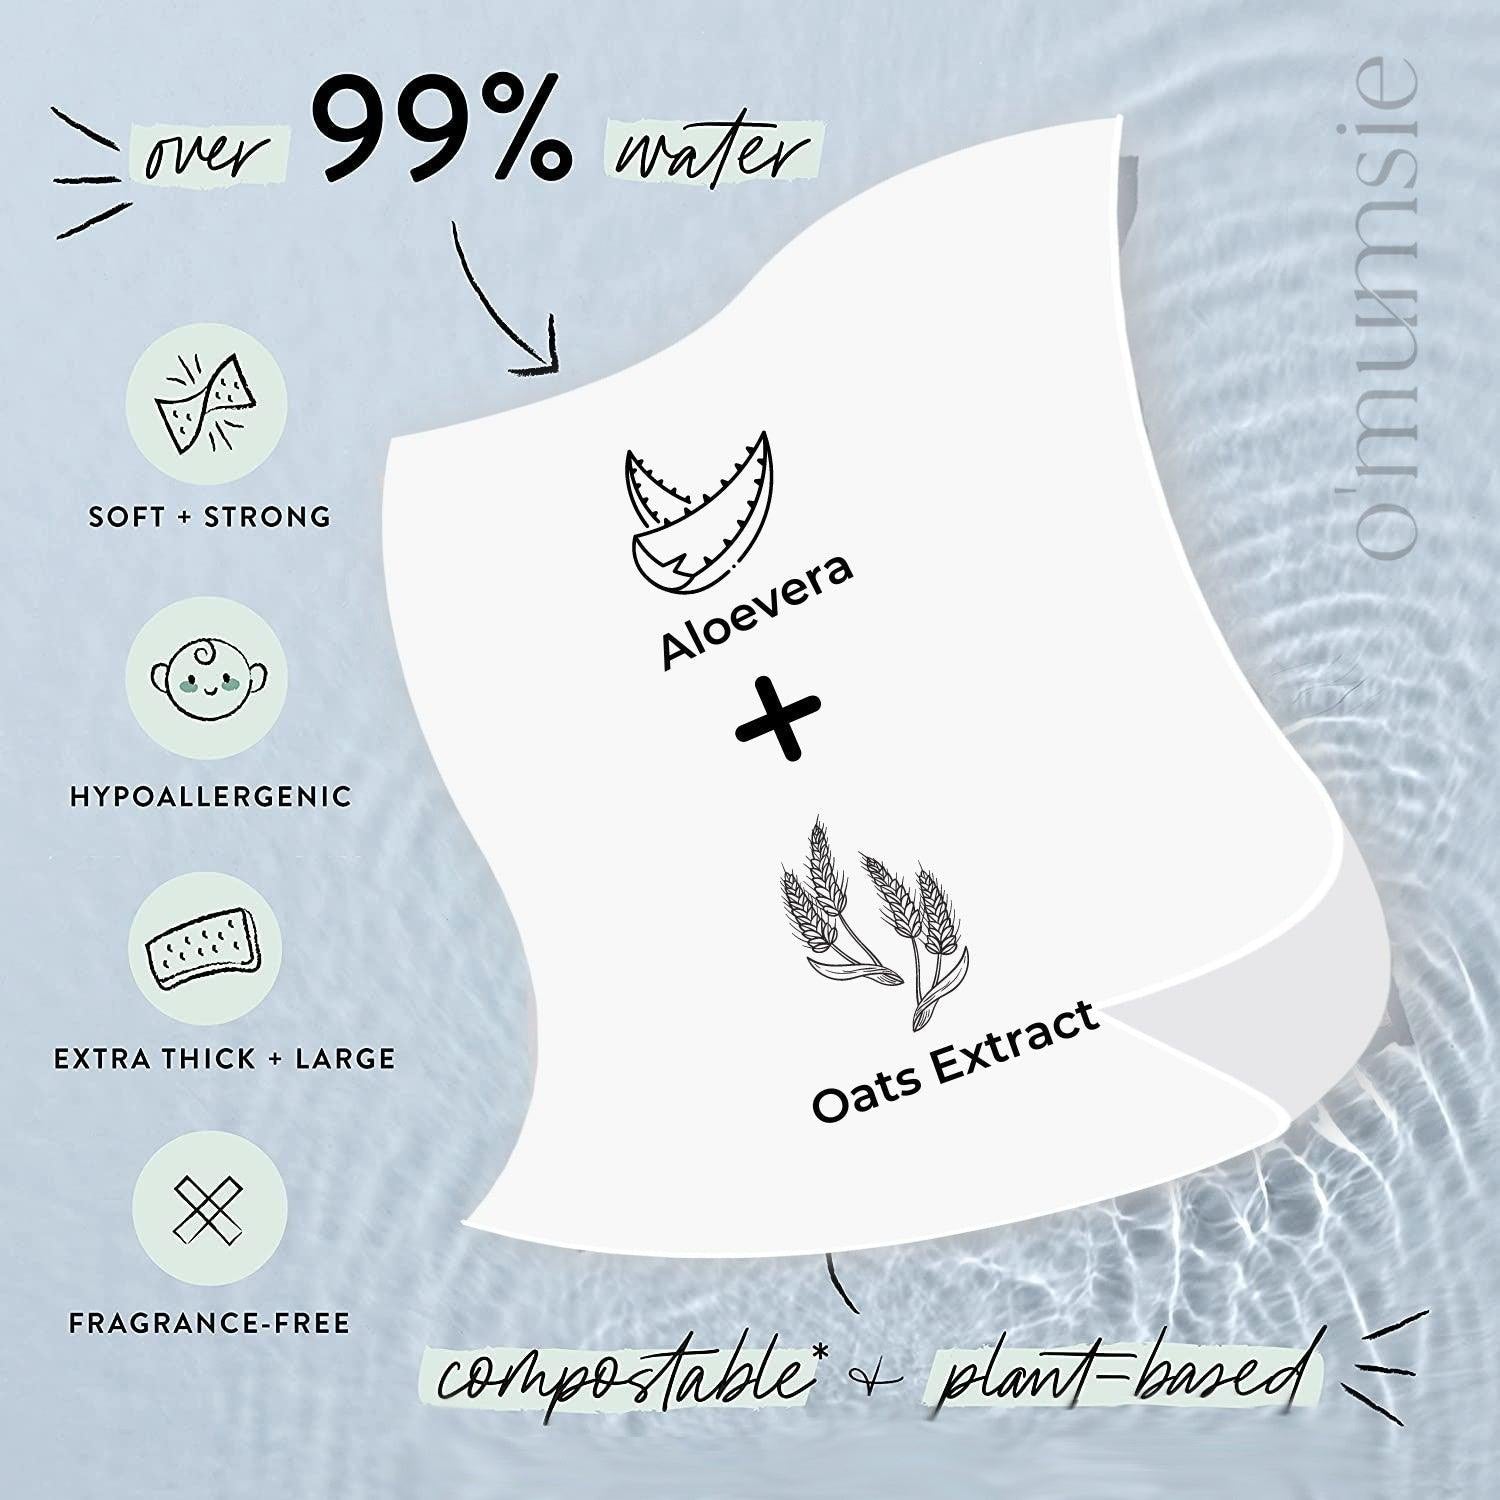 Omumsie 99% Pure Water (Unscented) Baby Wipes | Made With Thickest Plant Based Cotton Fibers - 60 pieces per pack, Pack of 3